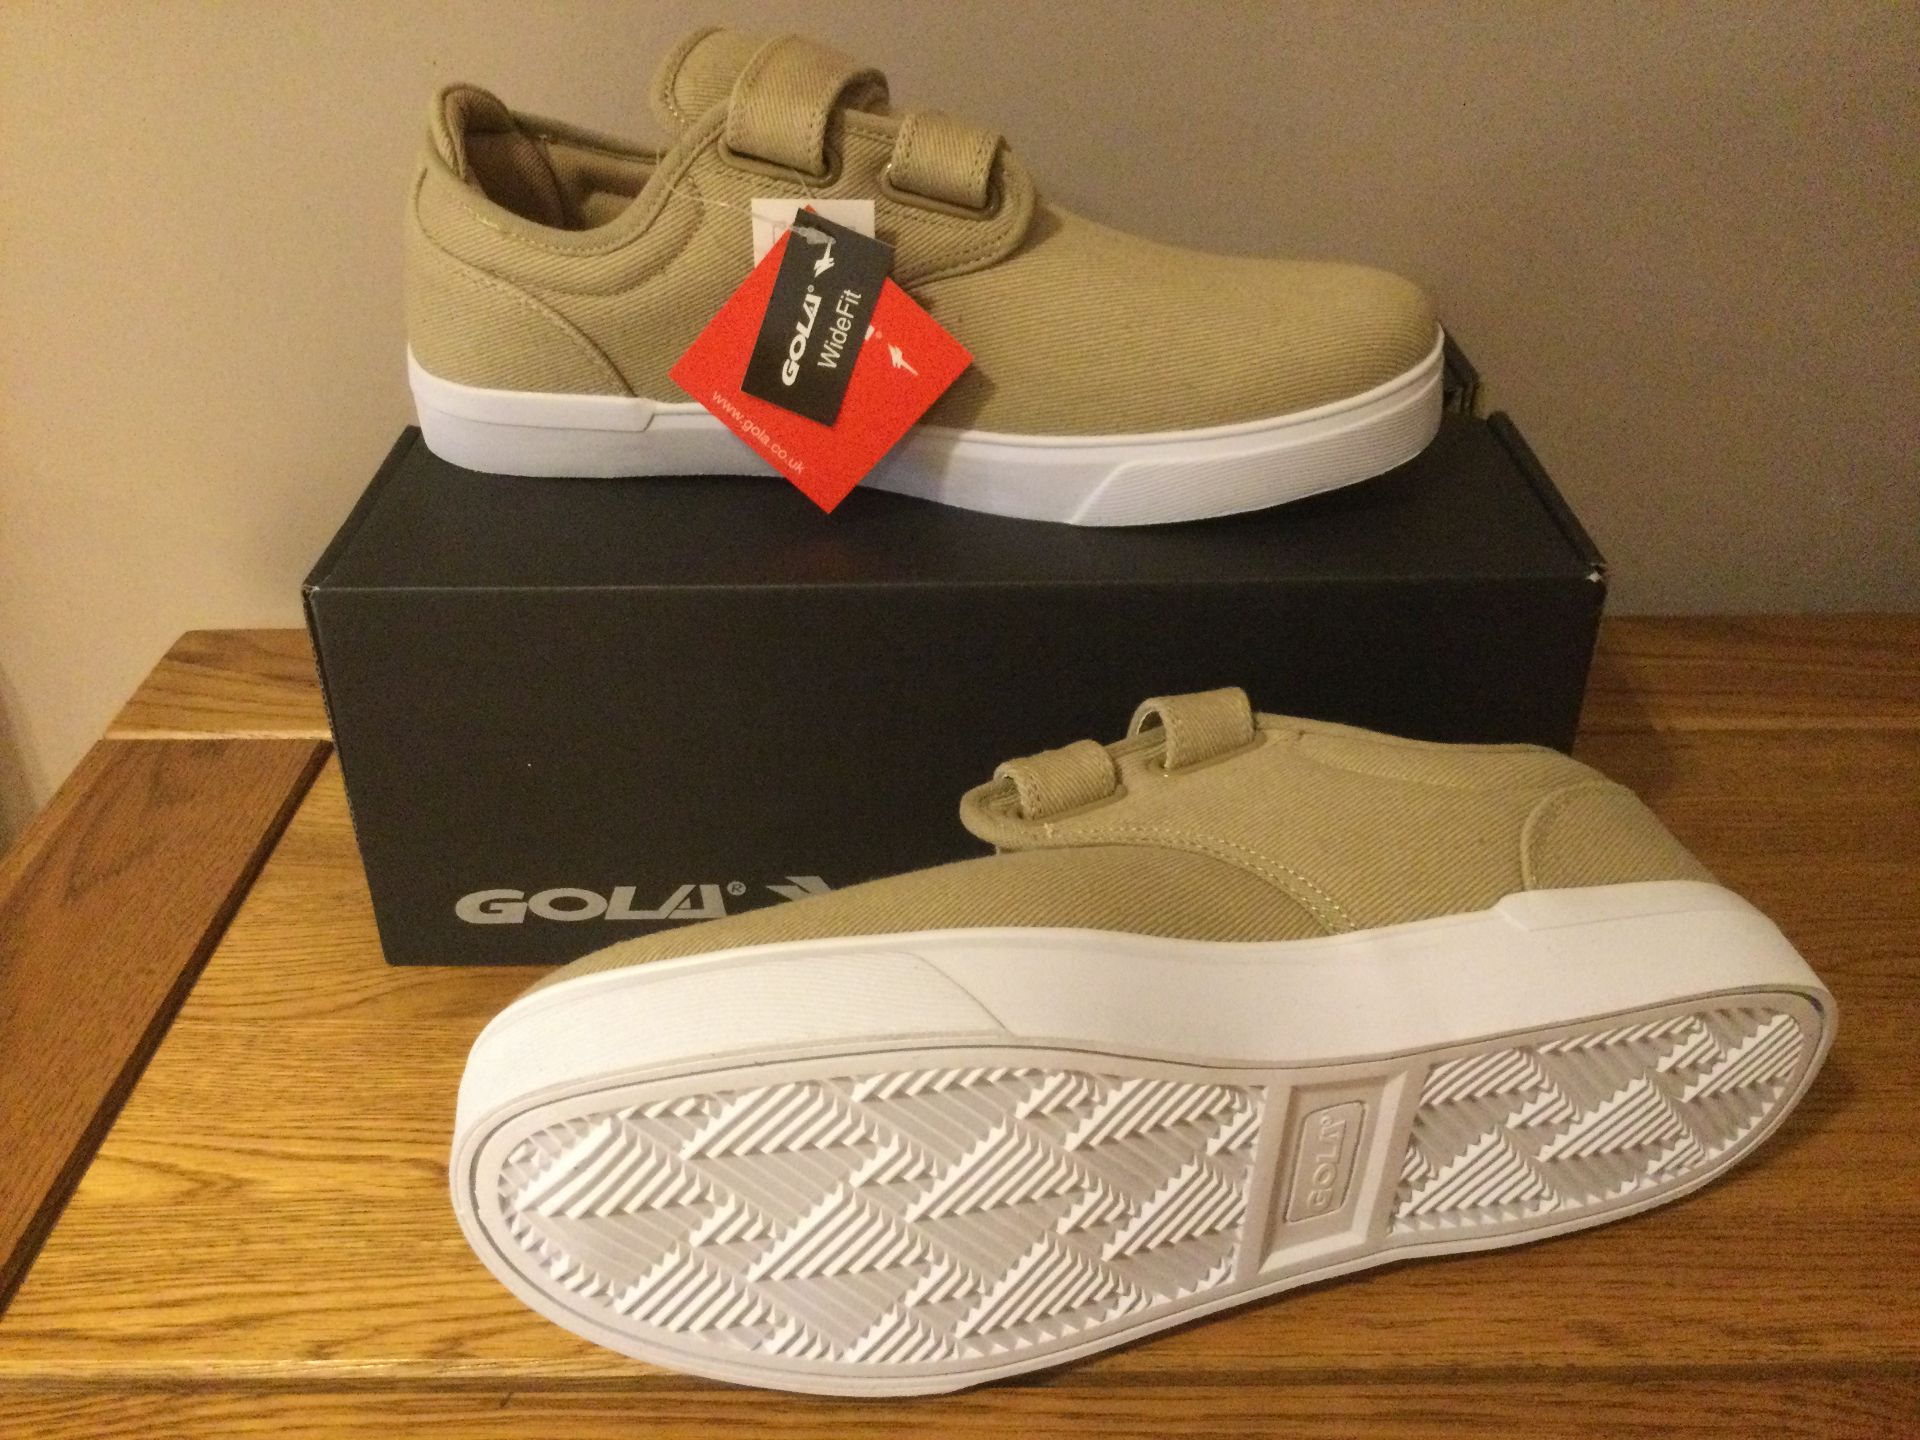 Gola “Panama” QF Men's Wide Fit Trainers, Size 11, Taupe/White - New RRP £36.00 - Image 4 of 5